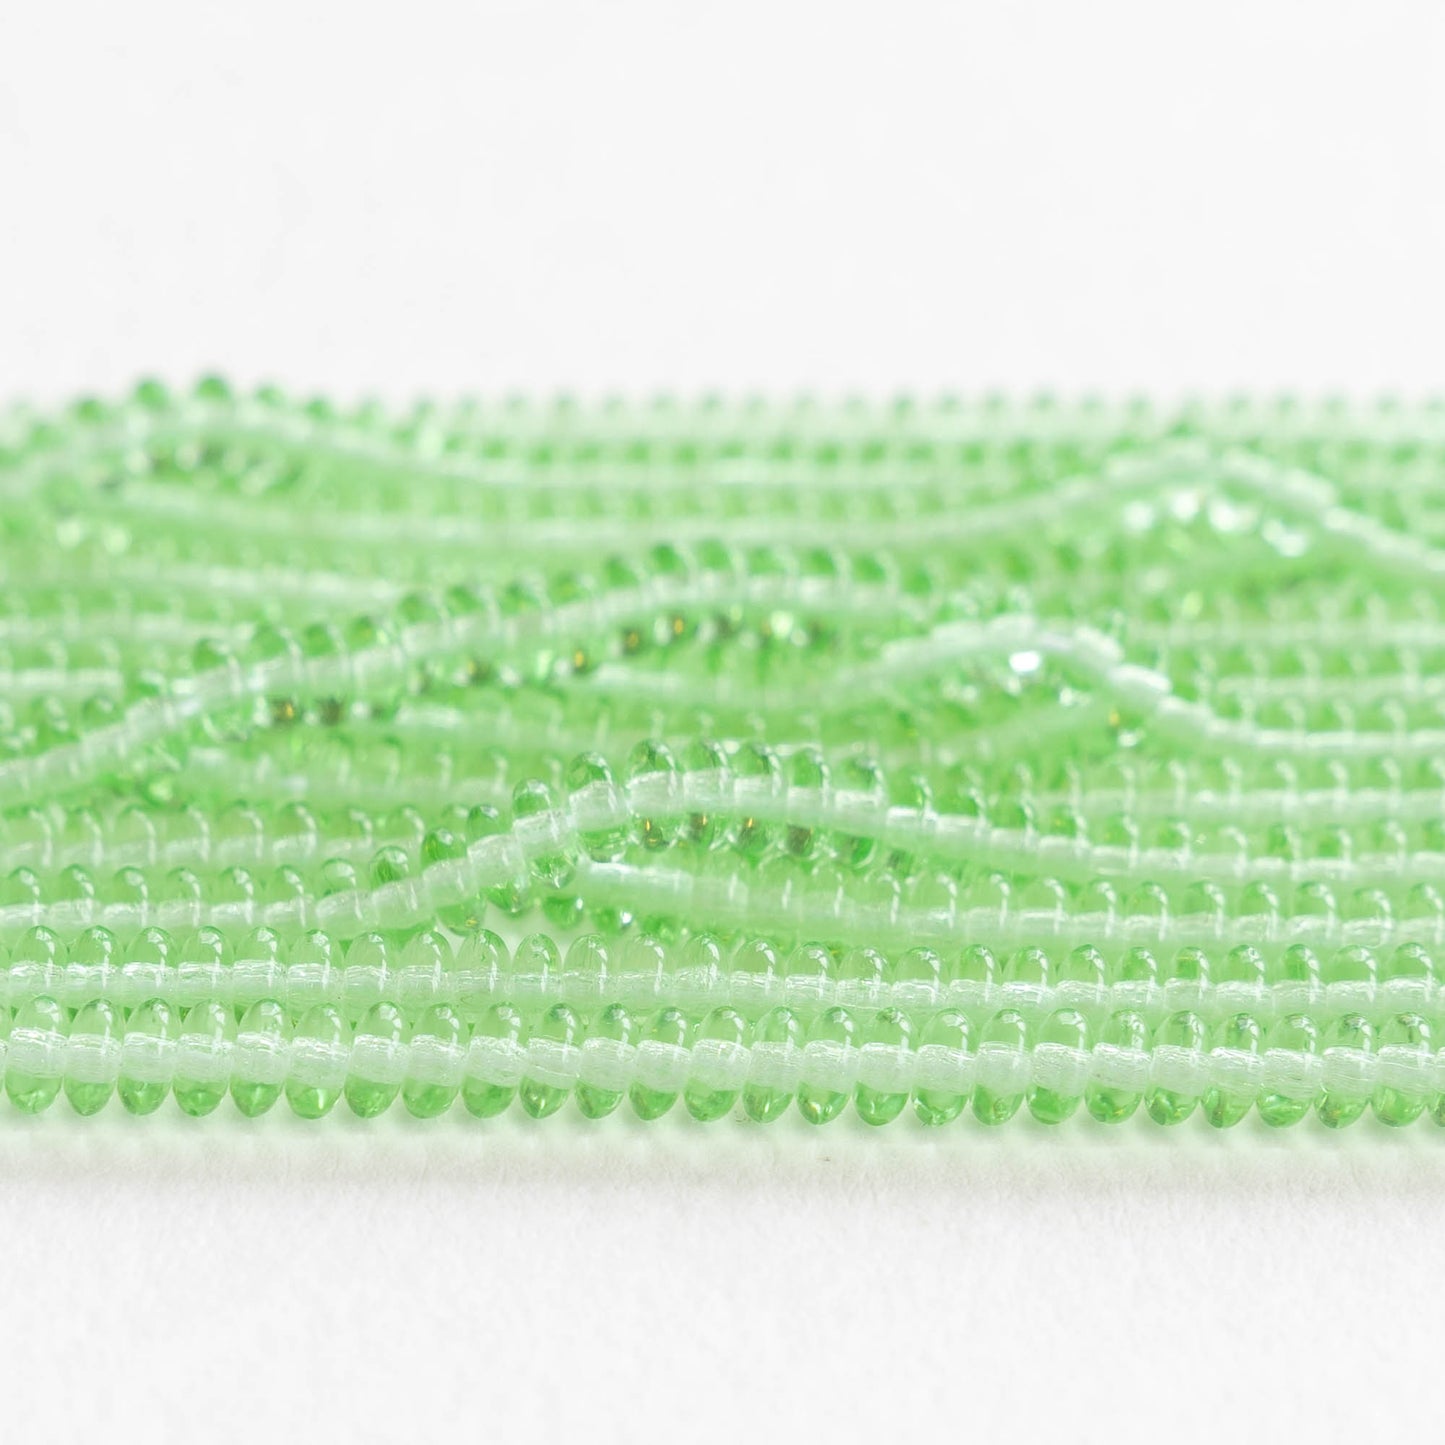 Load image into Gallery viewer, 4mm Rondelle Beads - Peridot Green - 100 Beads
